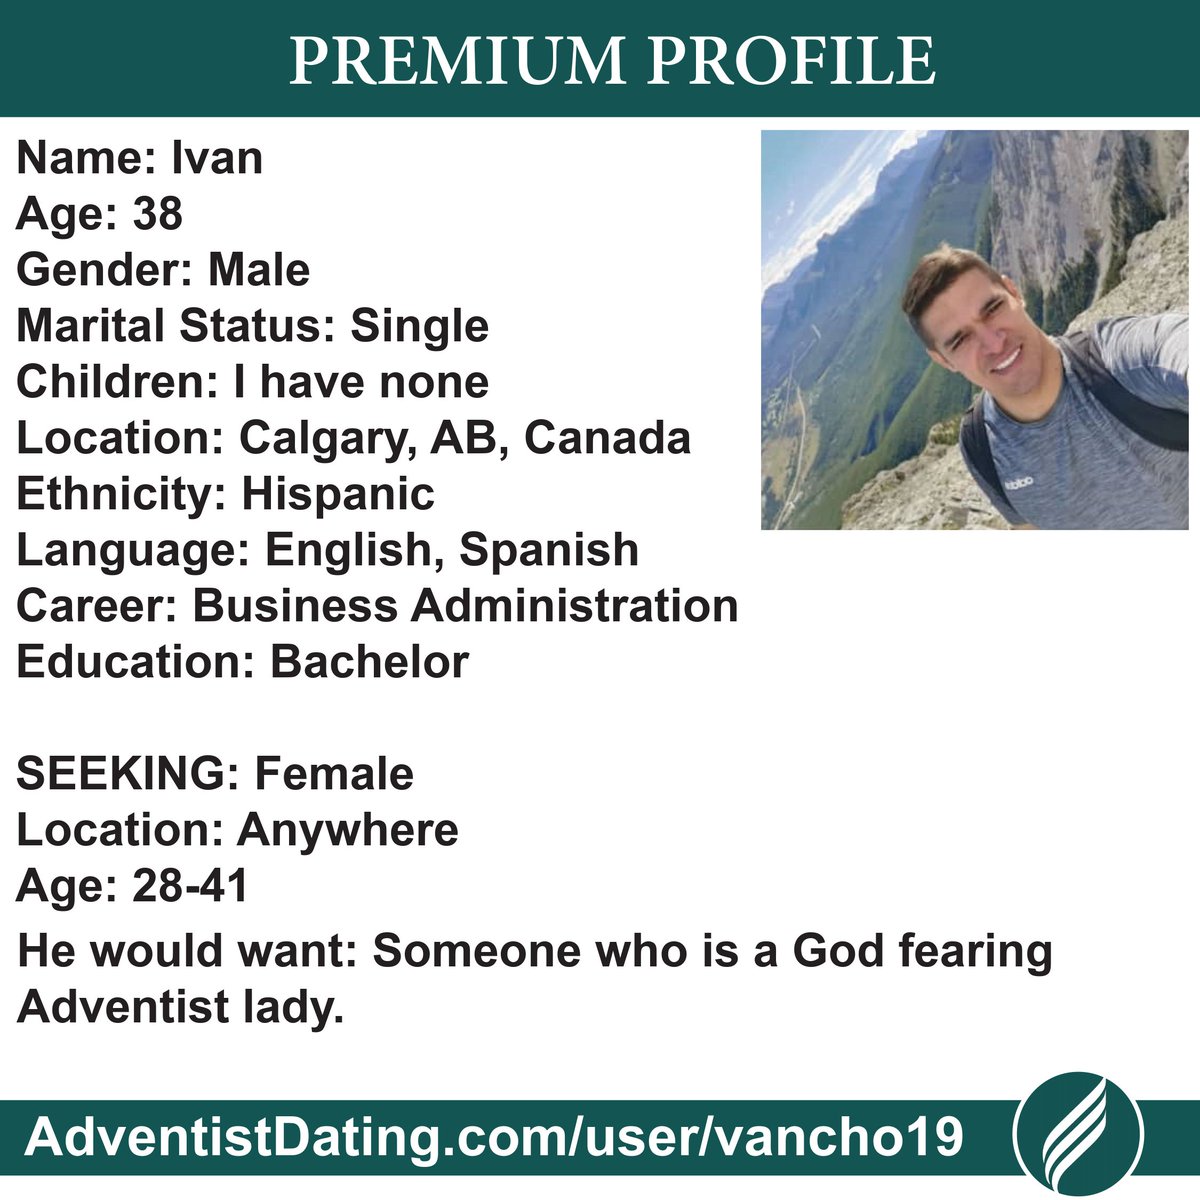 We want you to find a compatible Adventist Spouse adventistdating.com and establish an Adventist home to witness for Christ. We now serve Adventists  front over 179 countries.
#SDA #adventist #sdachurch #AdventistDating  #Adventistsingle user/vancho19